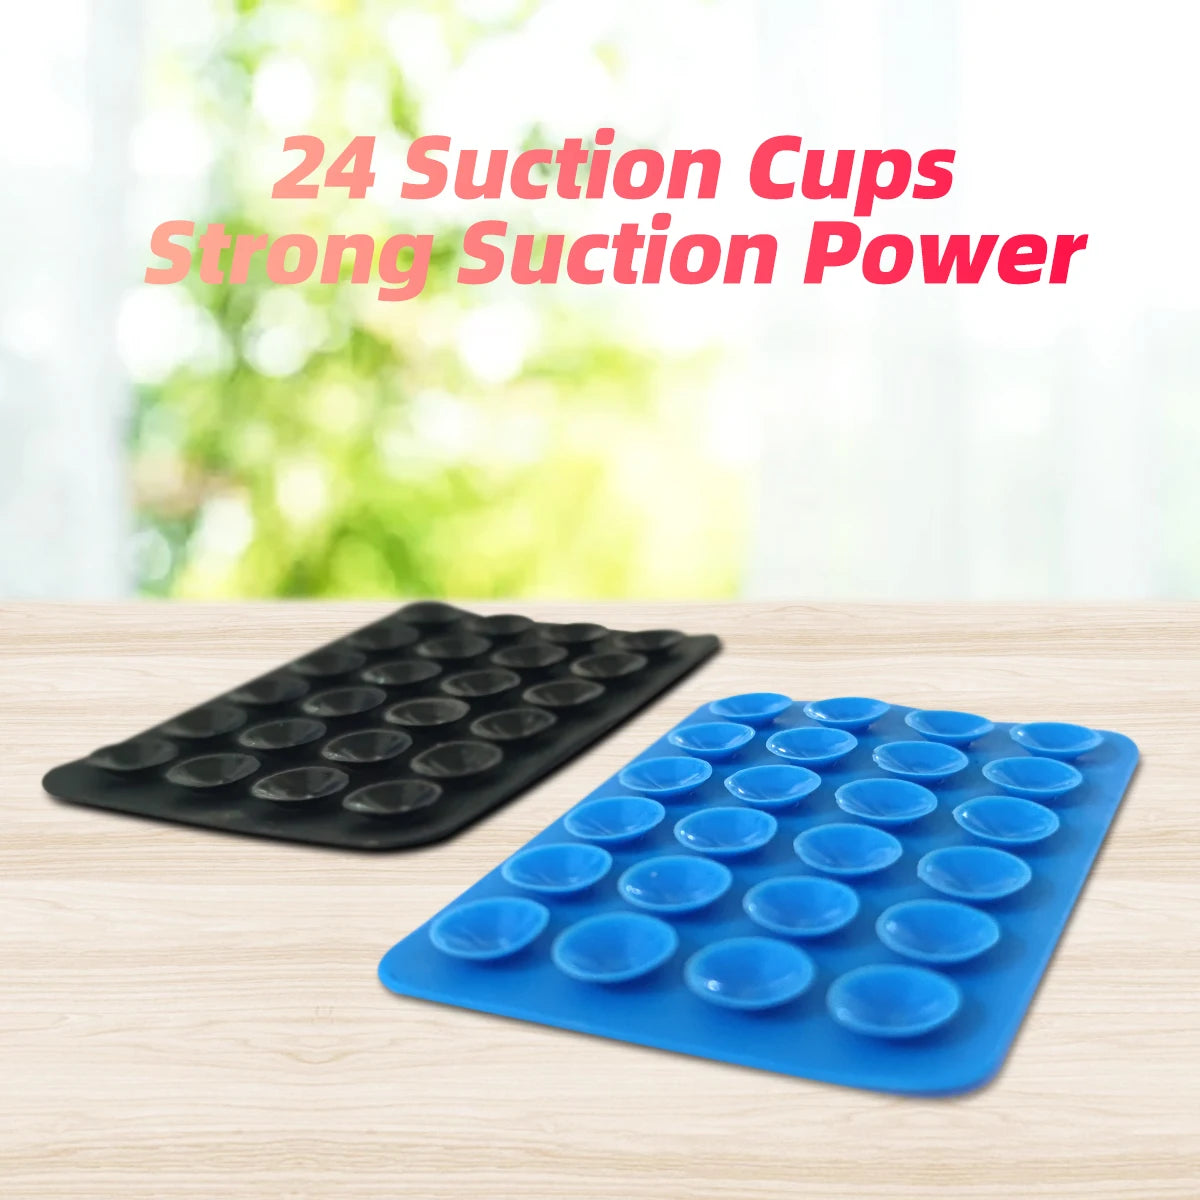 Silicone Suction Cup Back Sticker Phone Holder for Smartphone Wall Stand for Glass Ceramic Tiles Smooth Walls